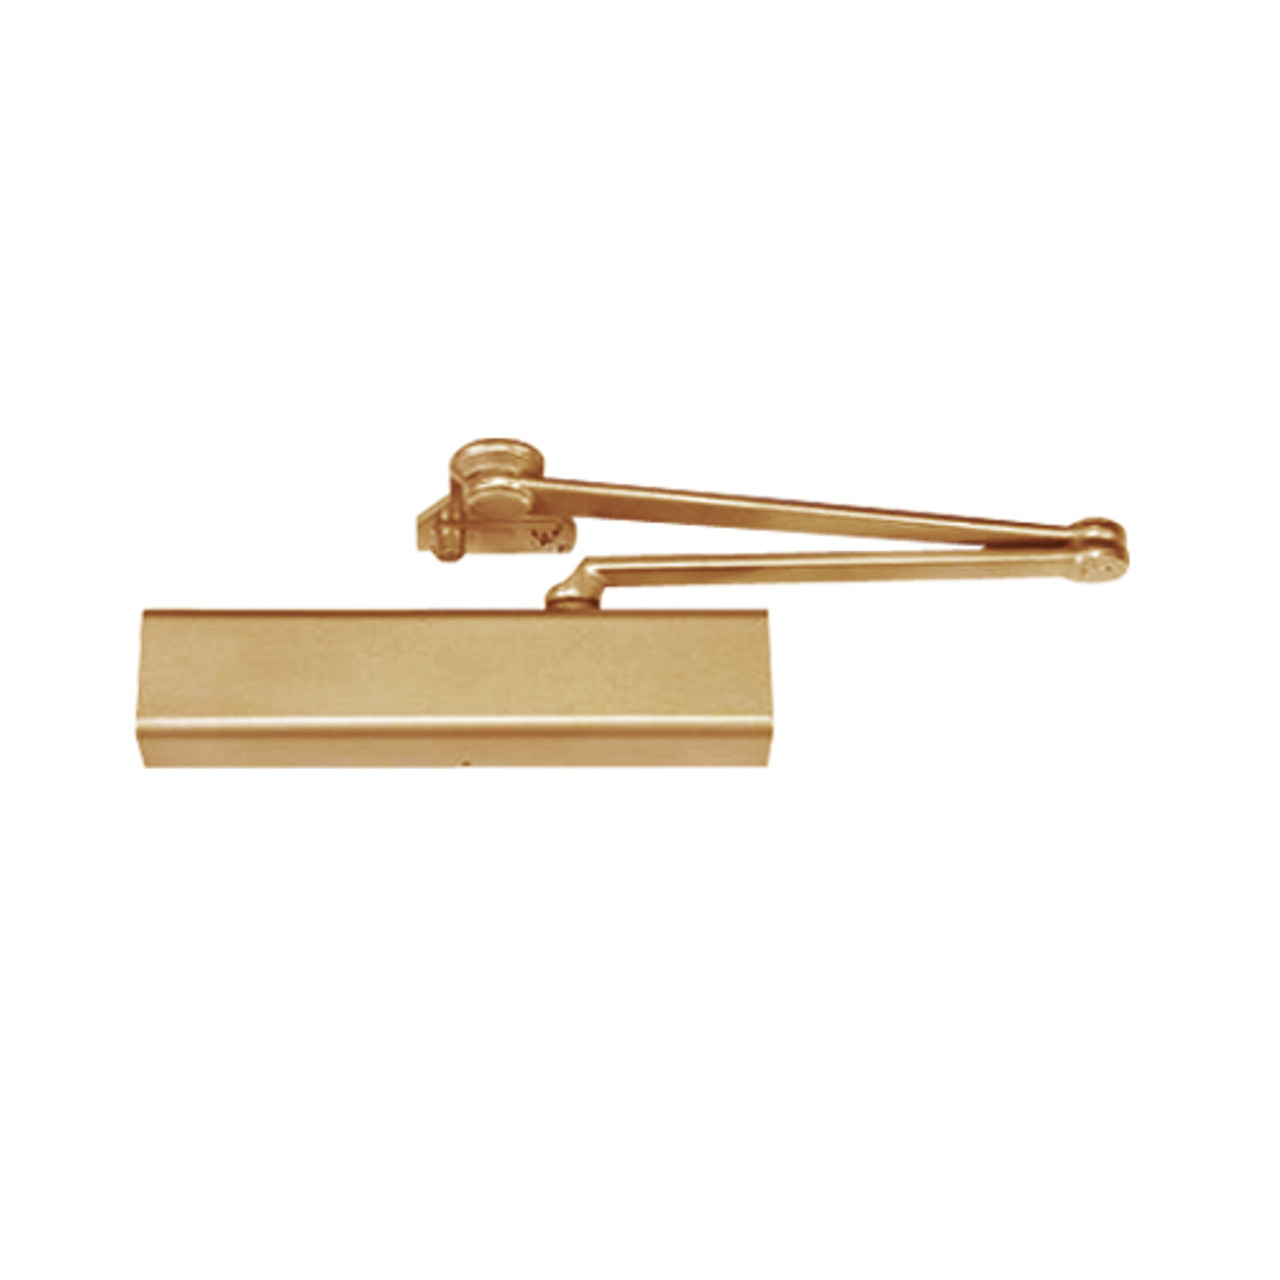 CLP8501M-691 Norton 8000 Series Full Cover Non-Hold Open Door Closers with CloserPlus Arm in Dull Bronze Finish